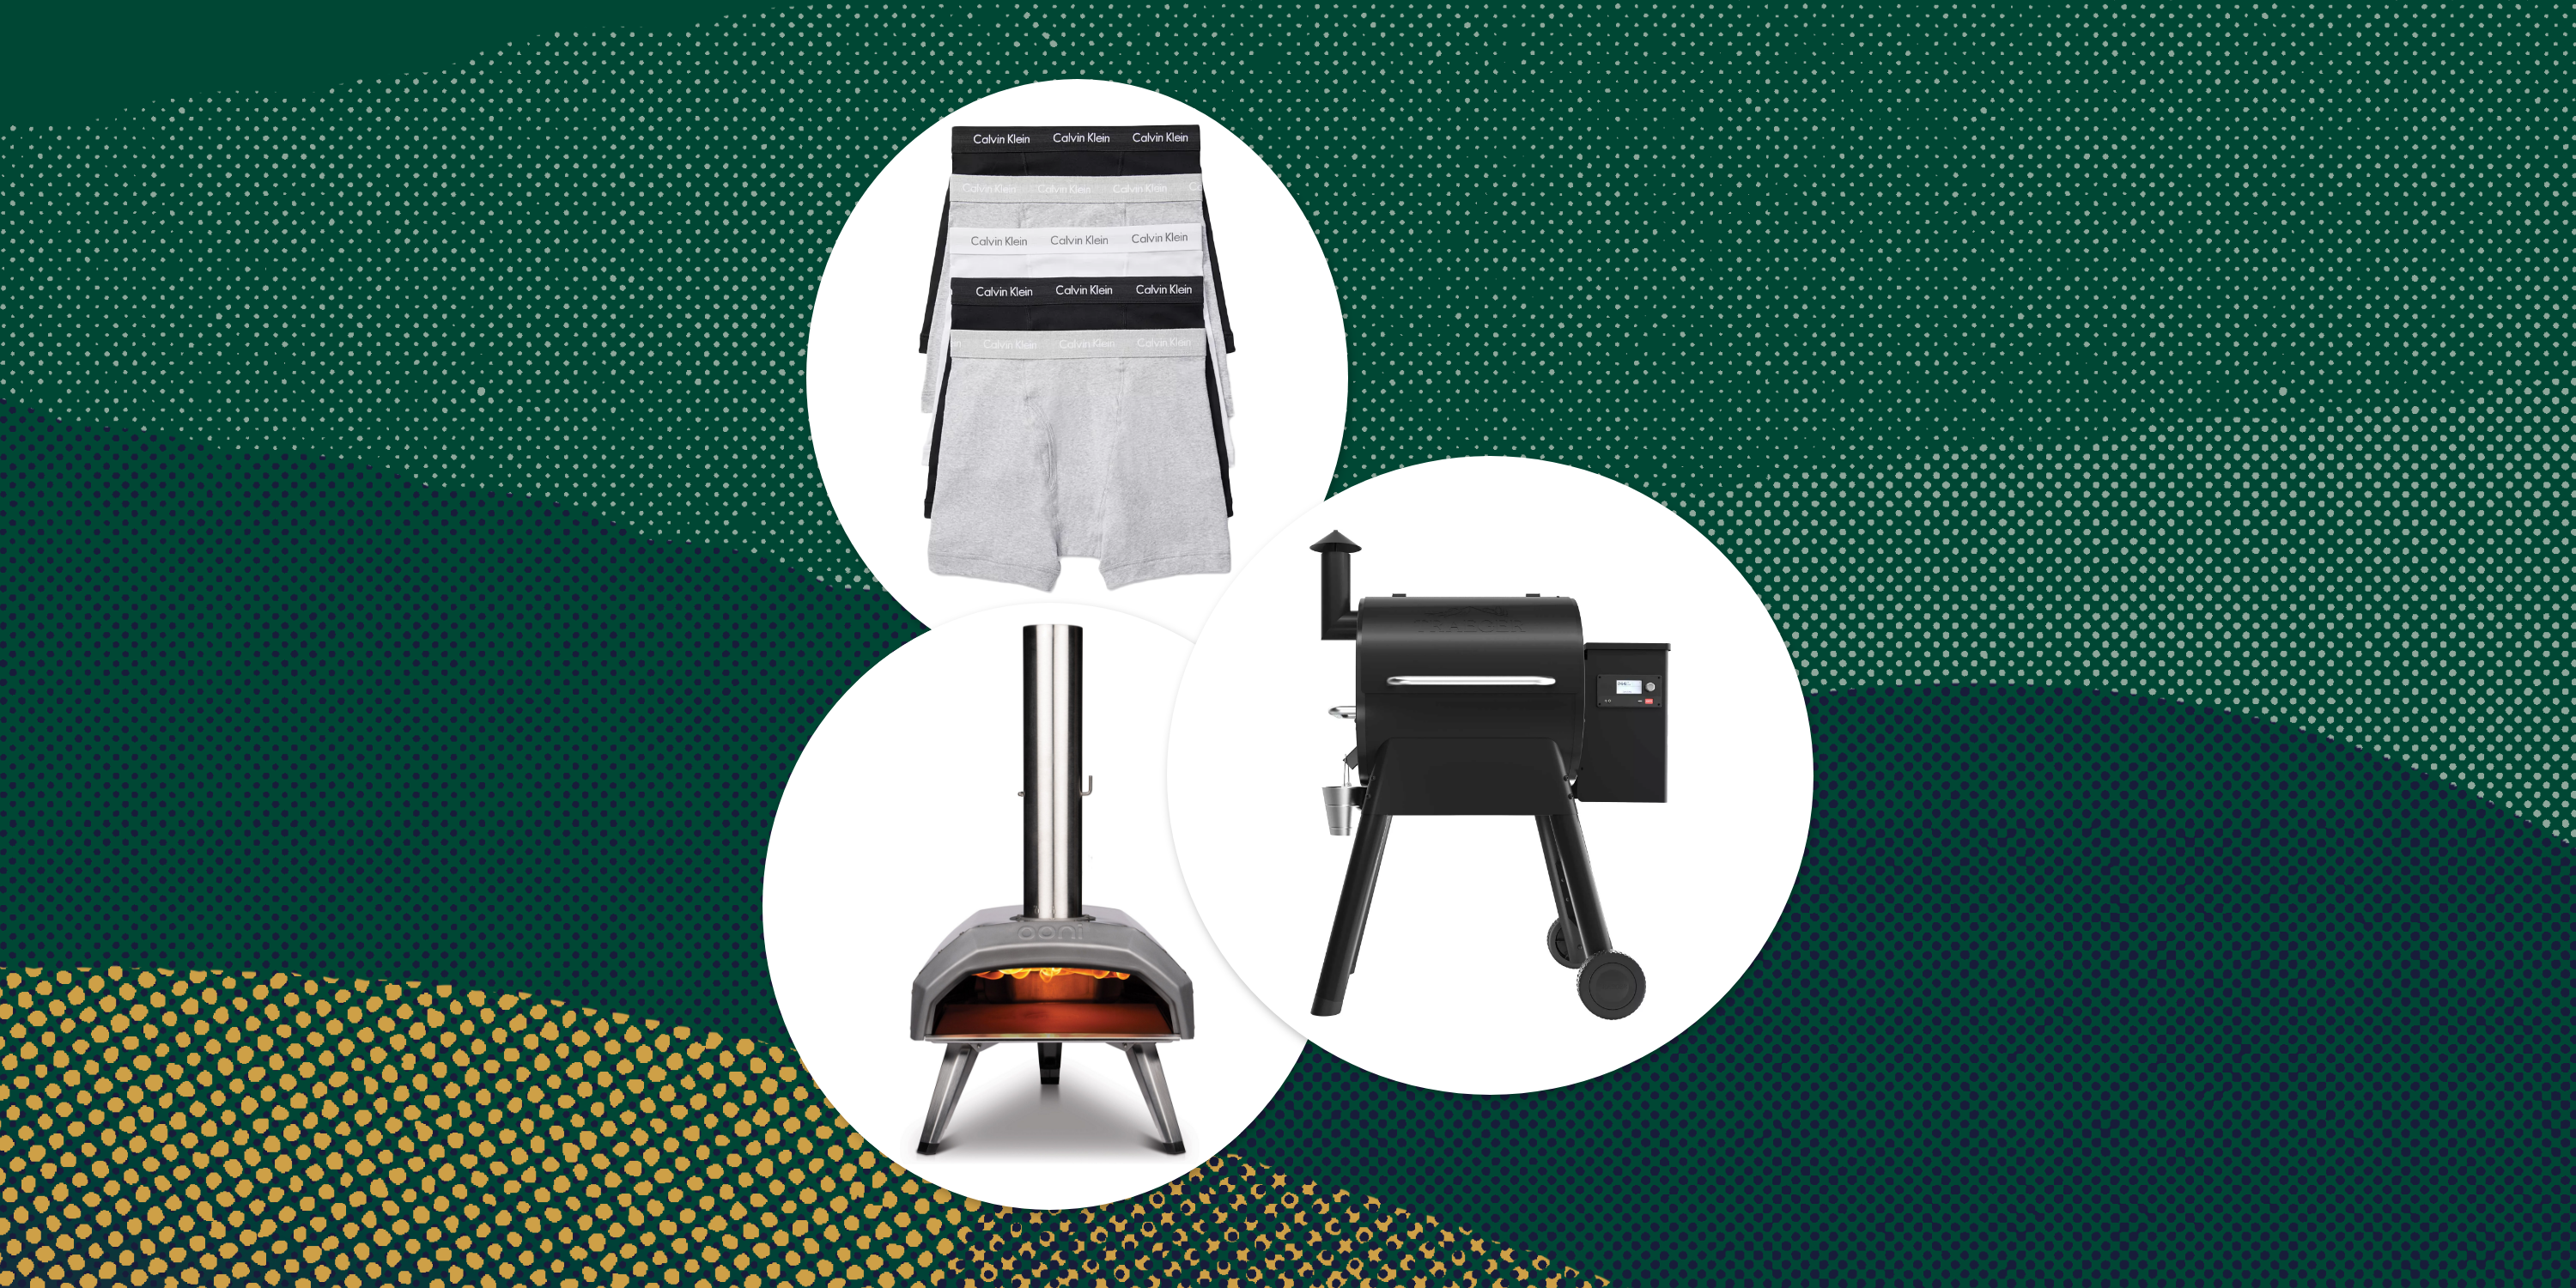 Today's Best Deals: Save on a Traeger Grill, Calvin Klein Underwear on Sale  & More